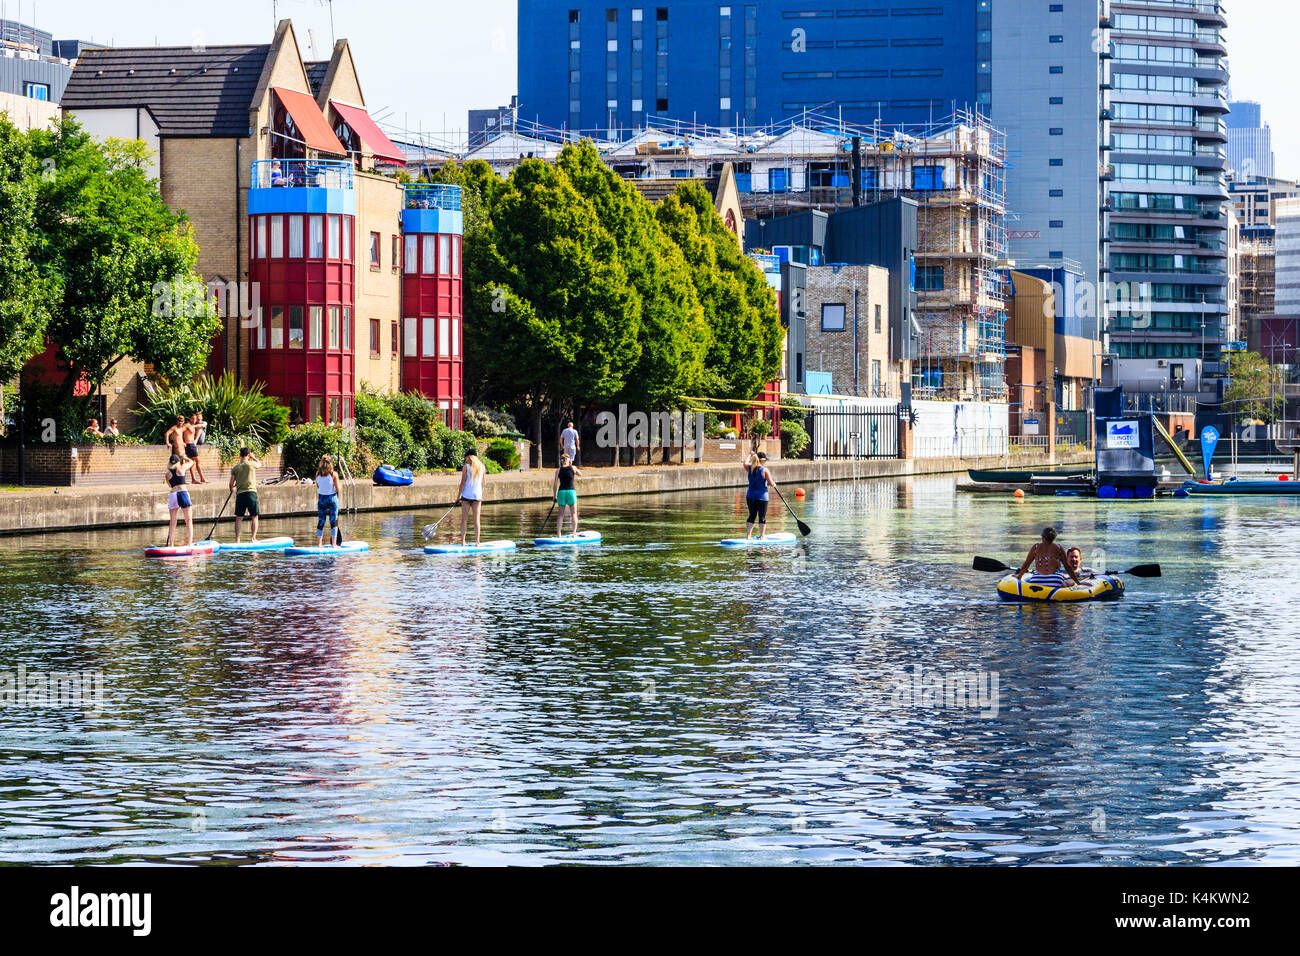 Paddleboarders in City Road Basin cooling off as temperatures rise, Regent's Canal, Islington, London, UK Stock Photo